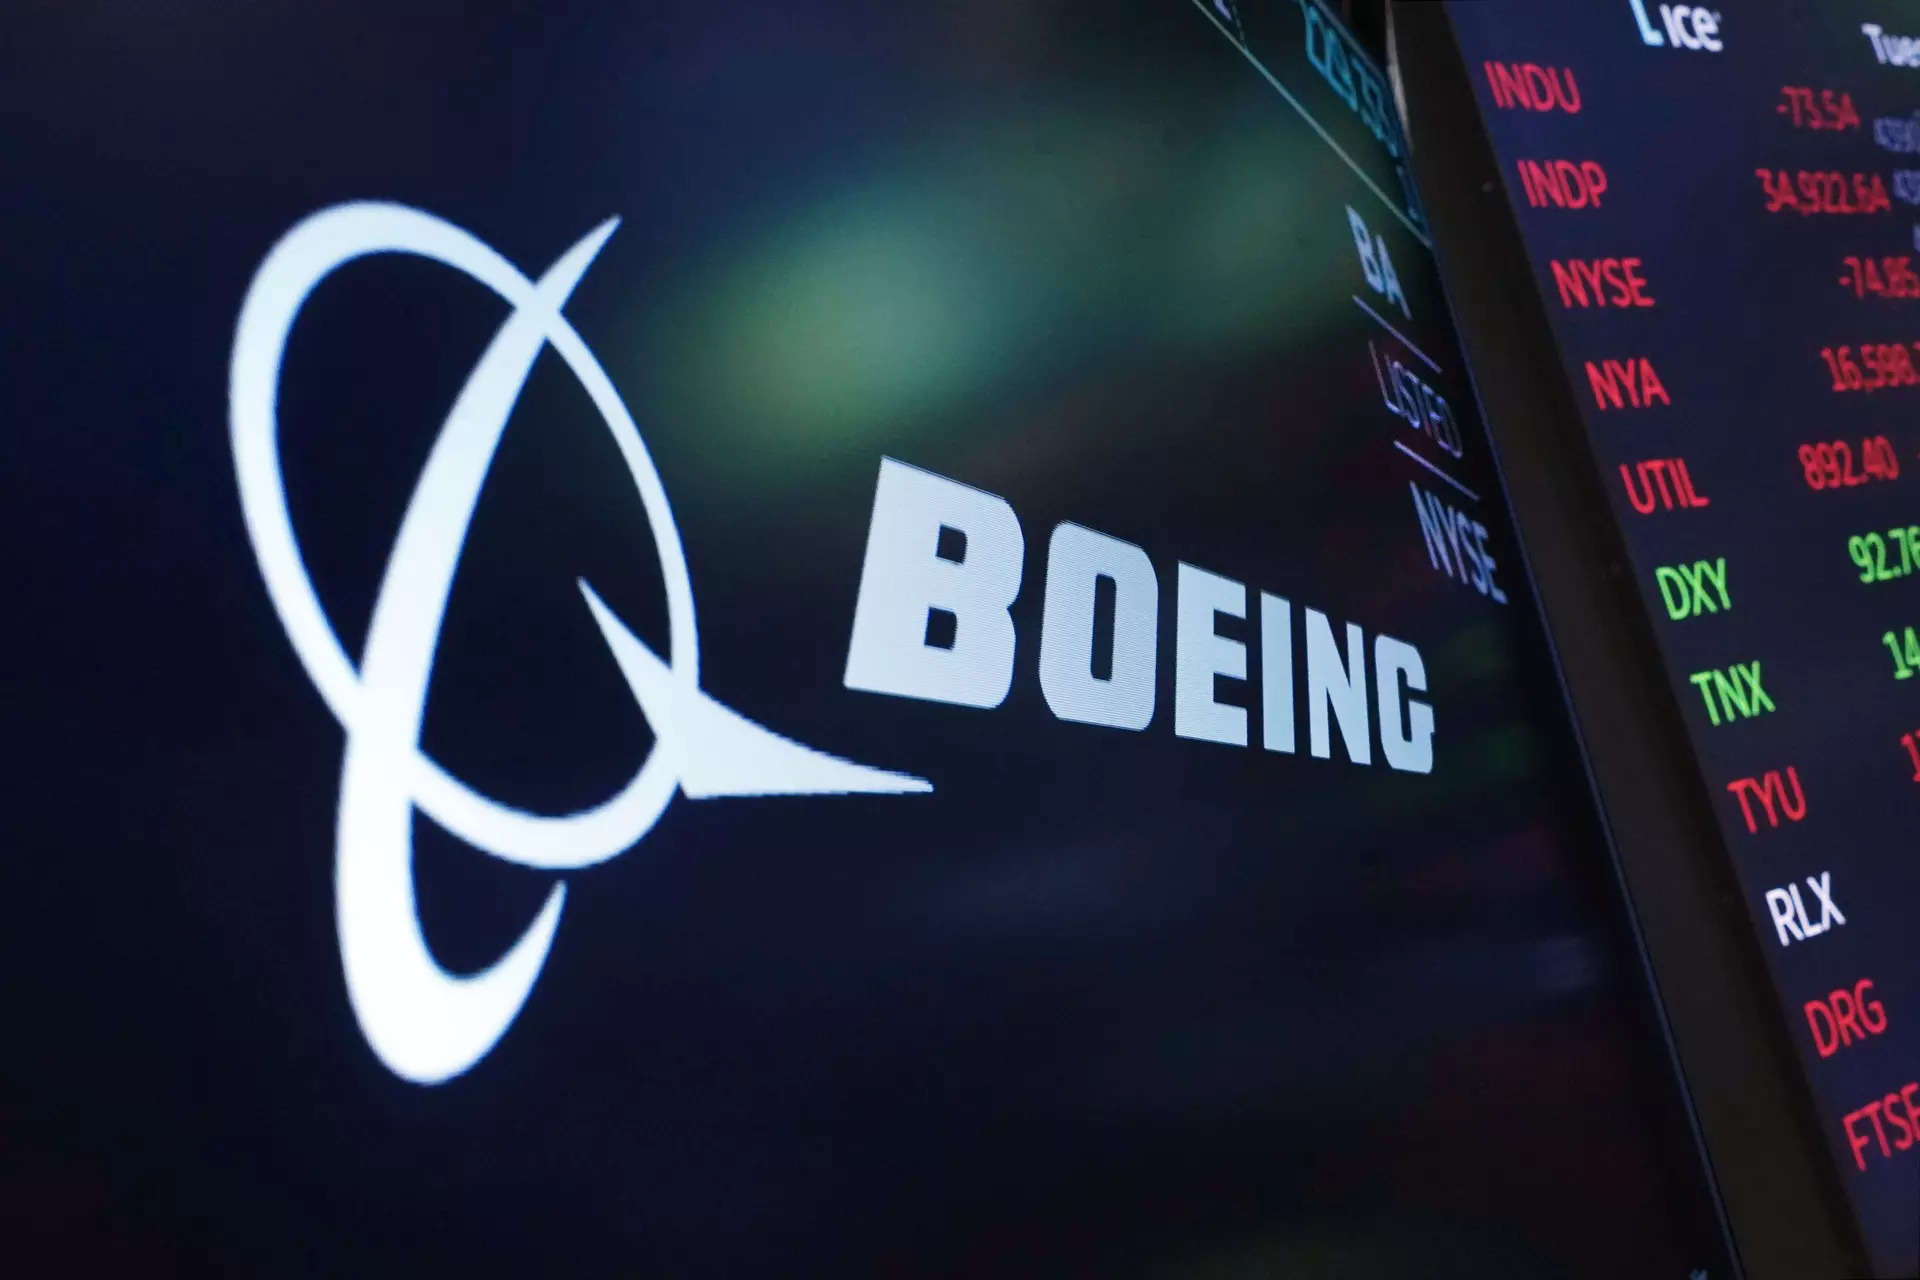 Boeing offers to buy 737 supplier Spirit Aero for $35 per share: Report 